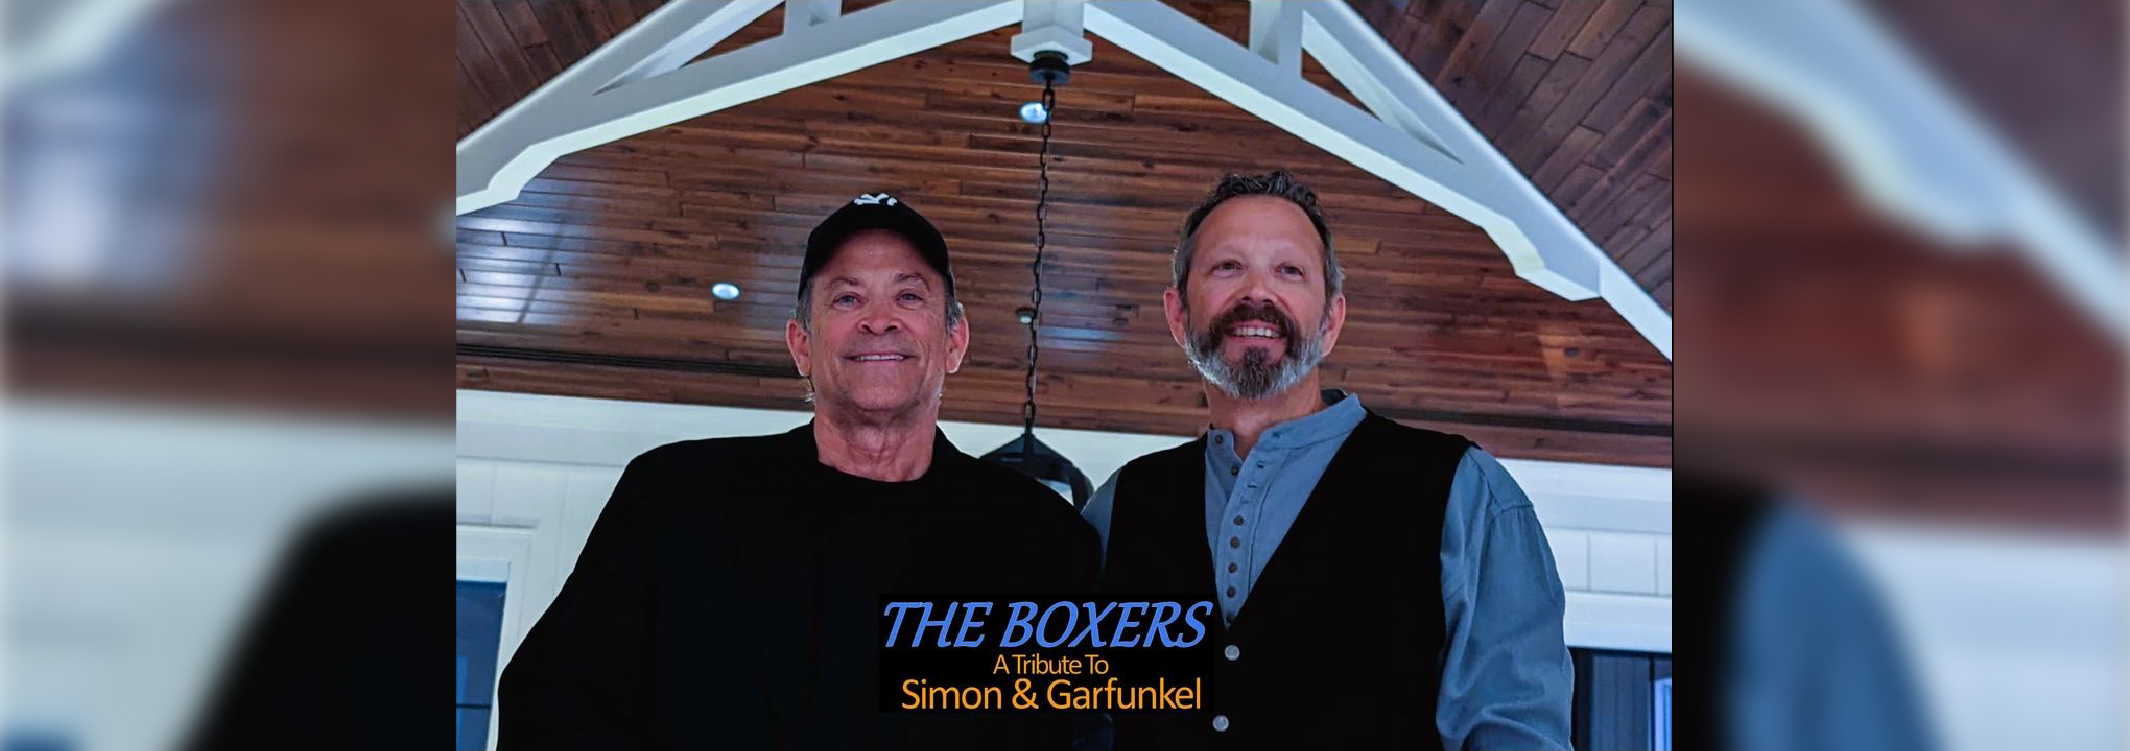 The Boxers – A Tribute to Simon and Garfunkel